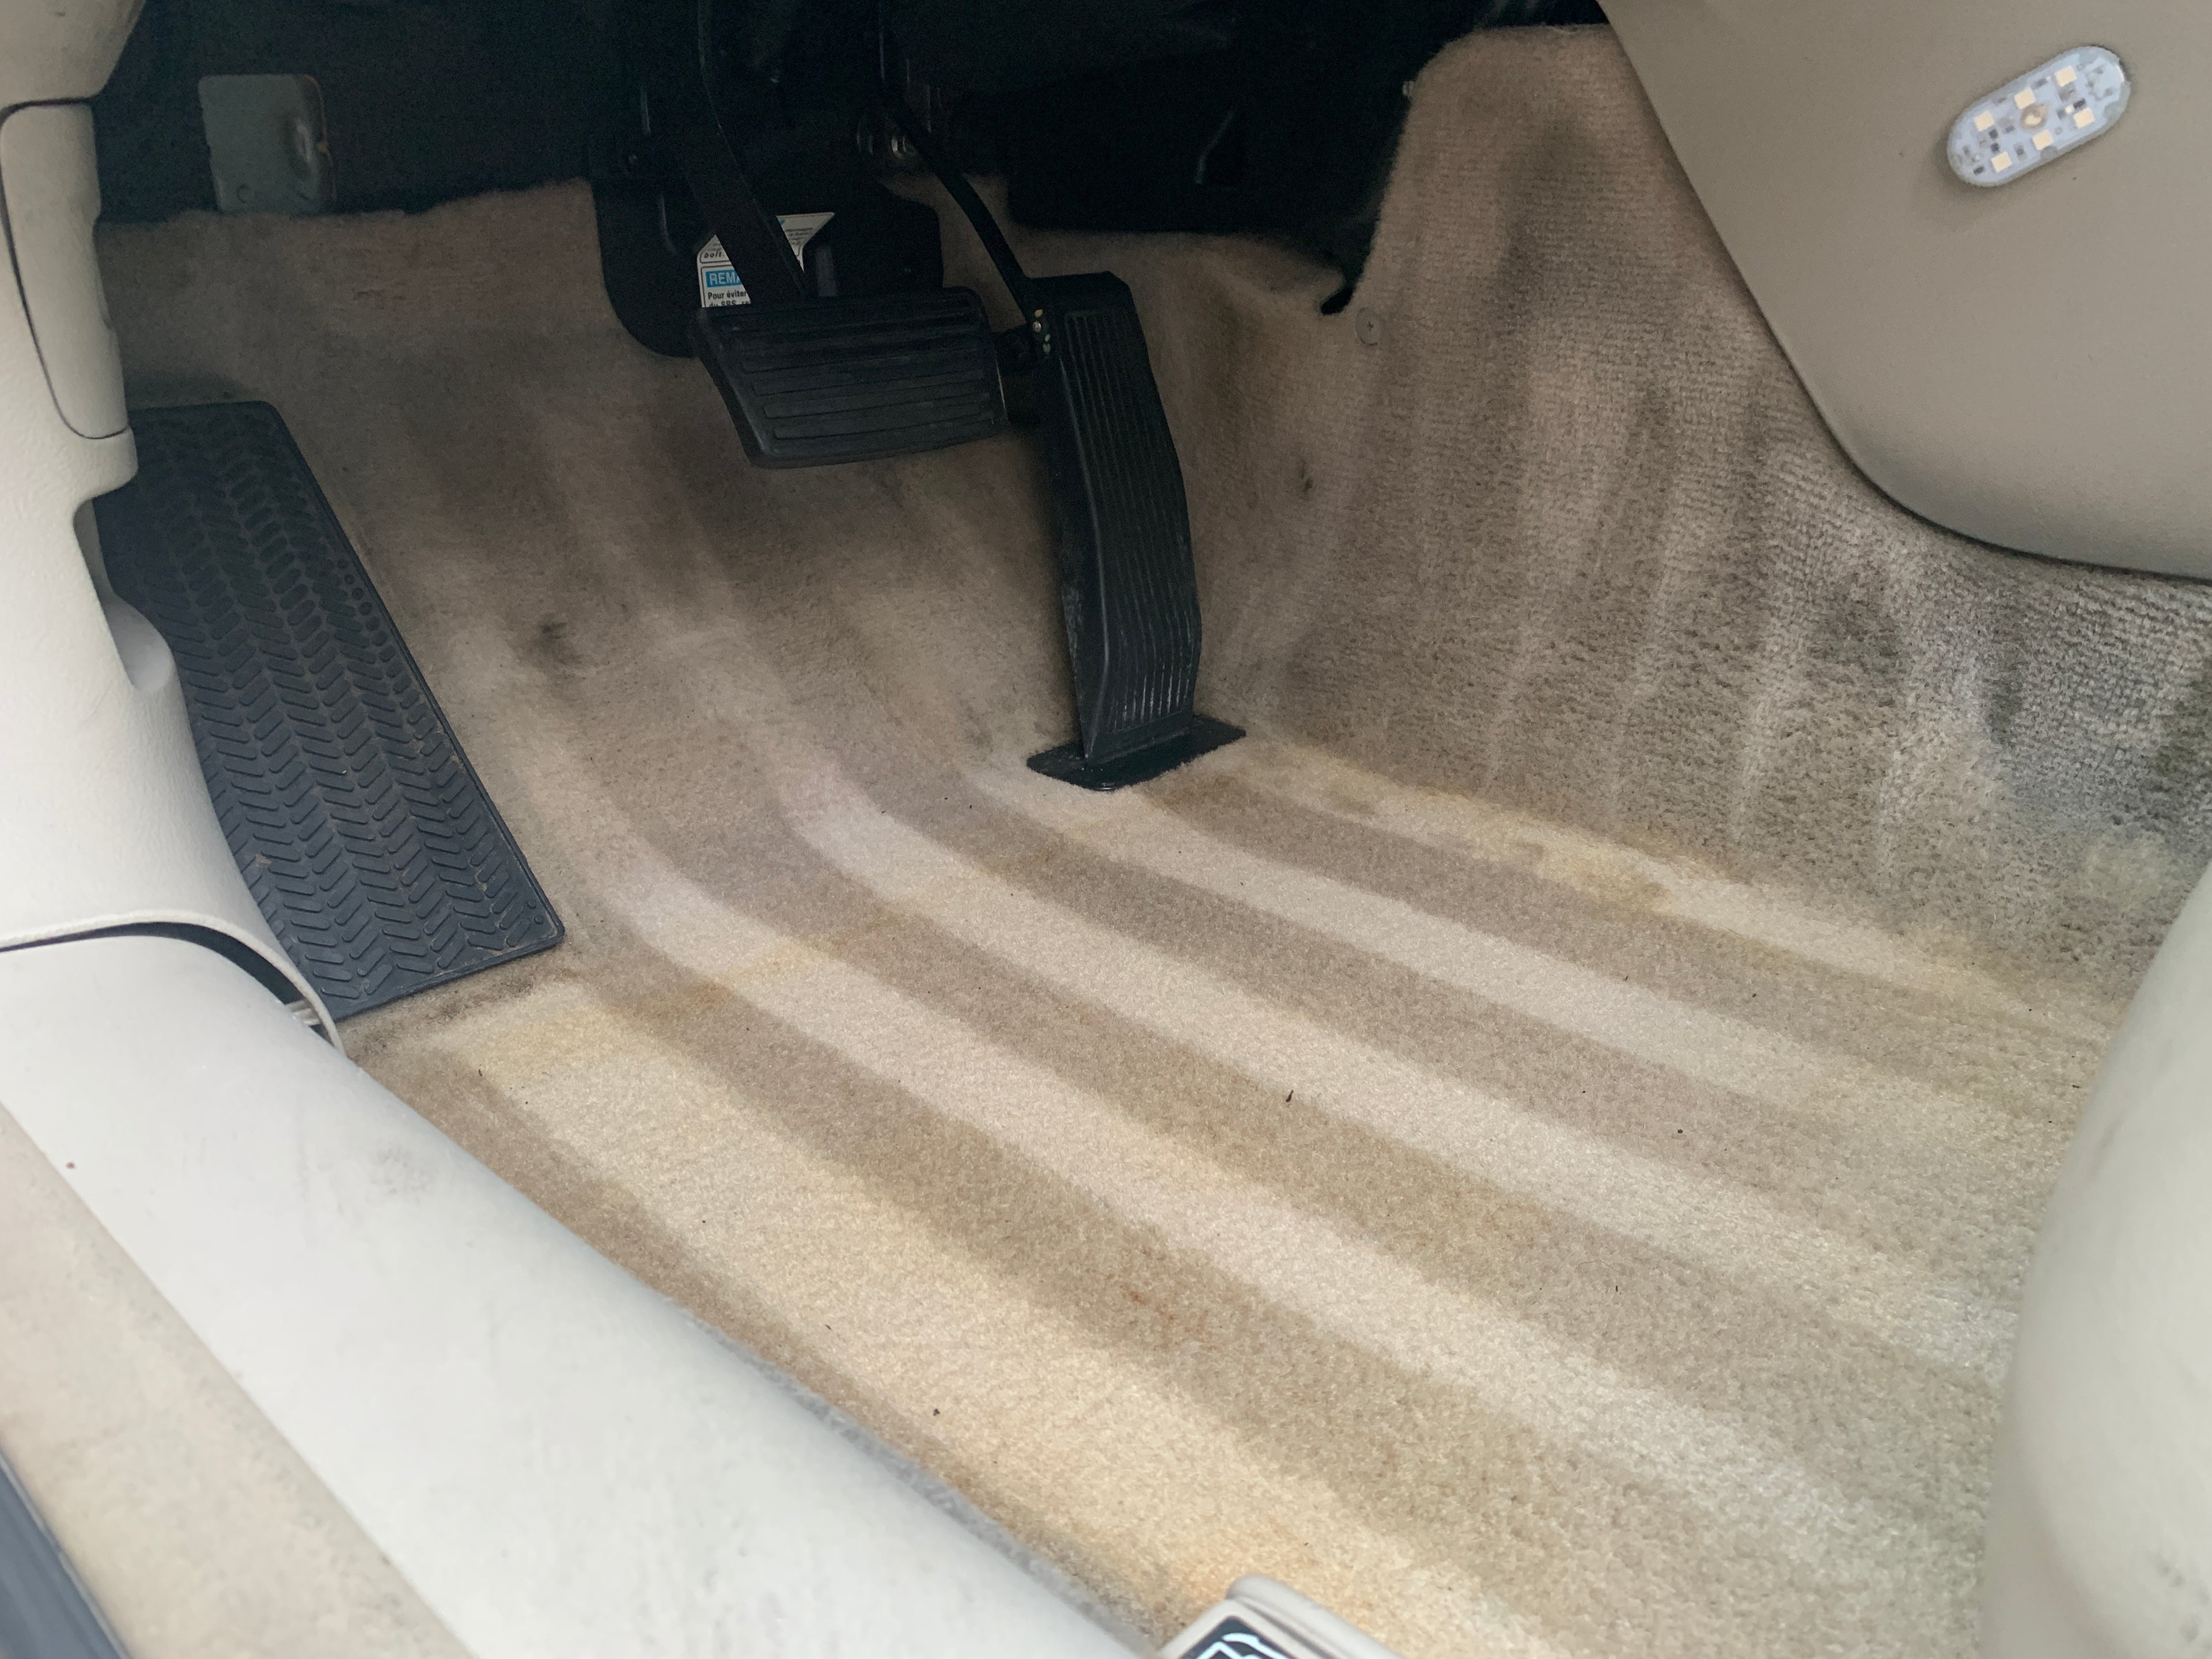 Removing carpet stains, smells,  oil, dirt and heavy debris.